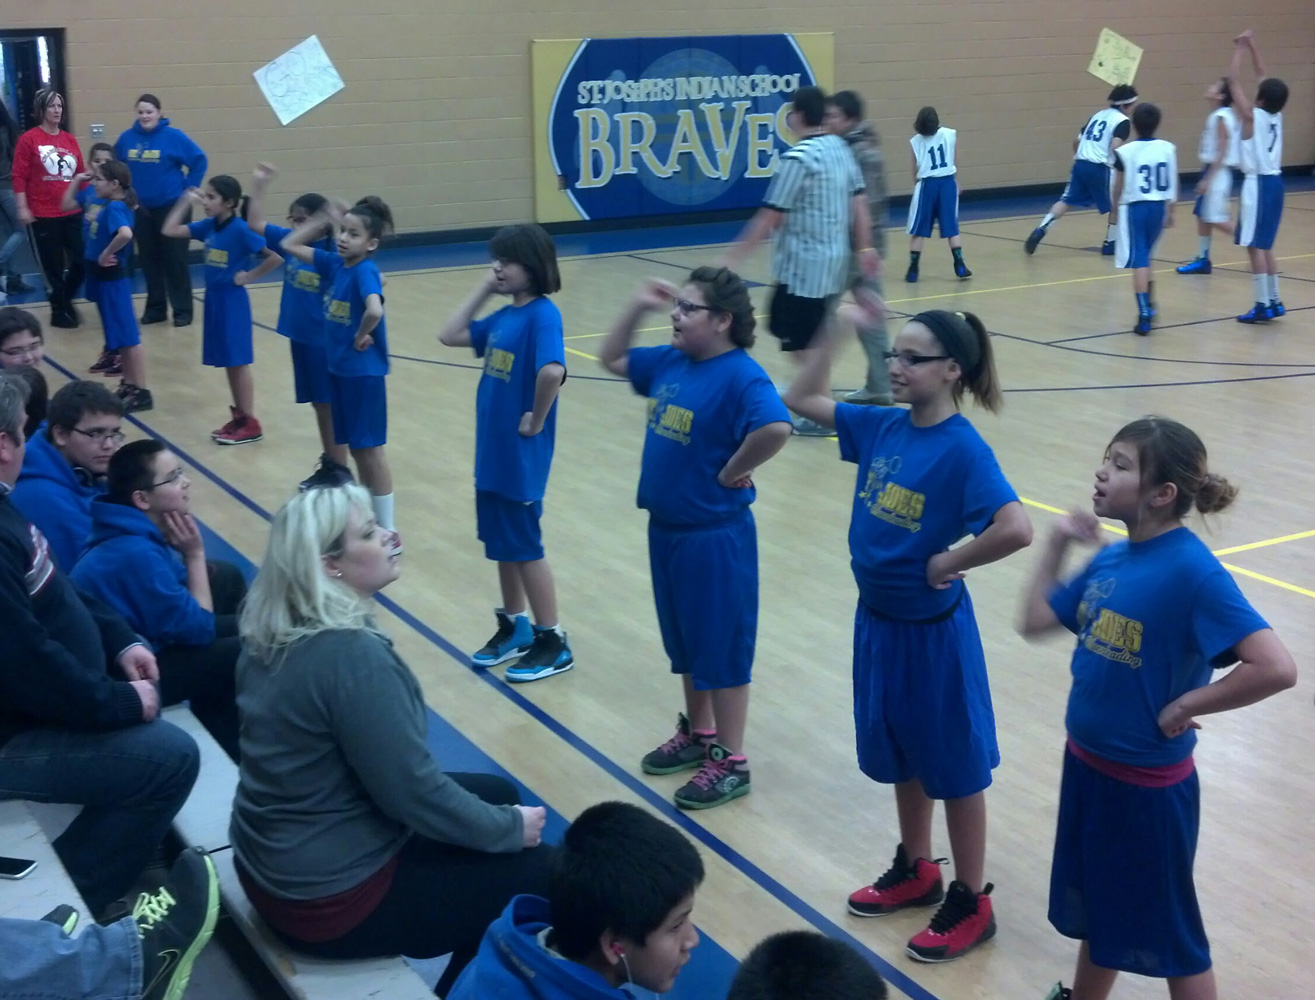 St. Joseph’s students participate in all kinds of sports, including basketball and cheerleading, at our rec center. 